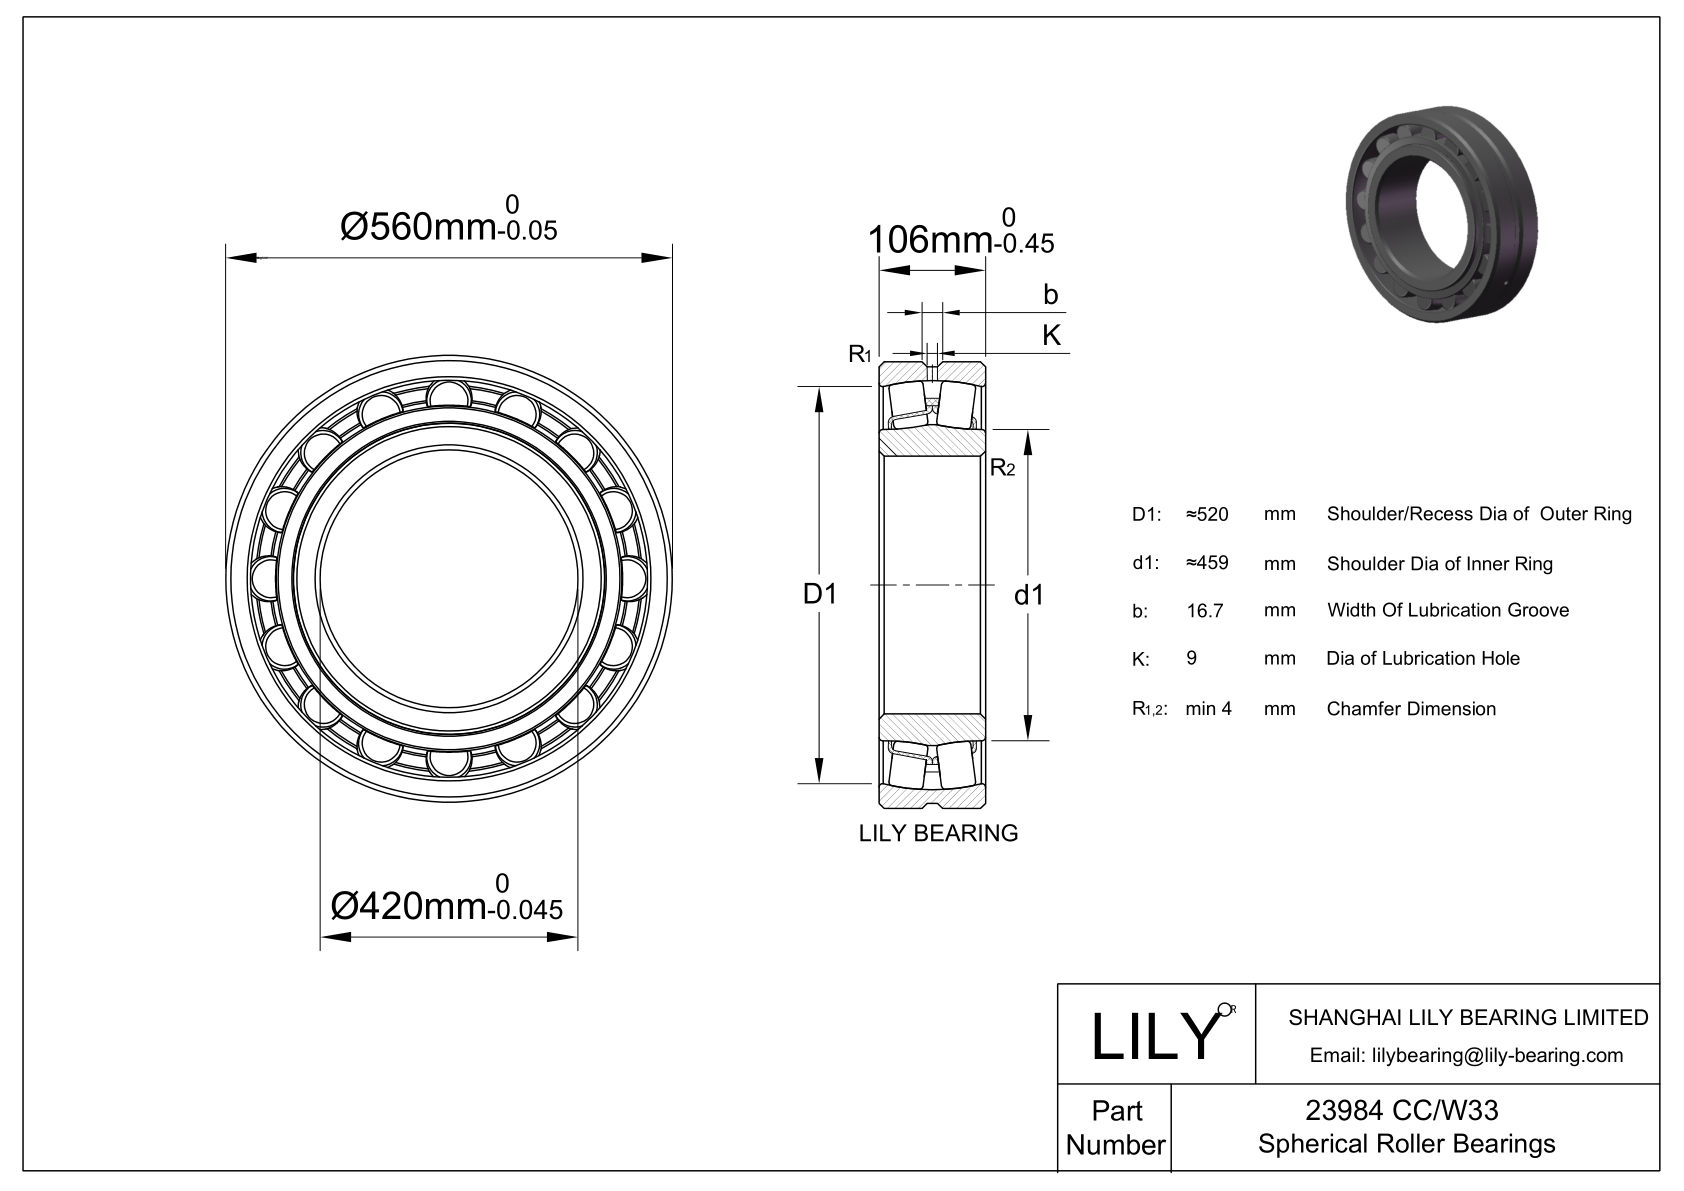 23984 CC/W33 Double Row Spherical Roller Bearing cad drawing